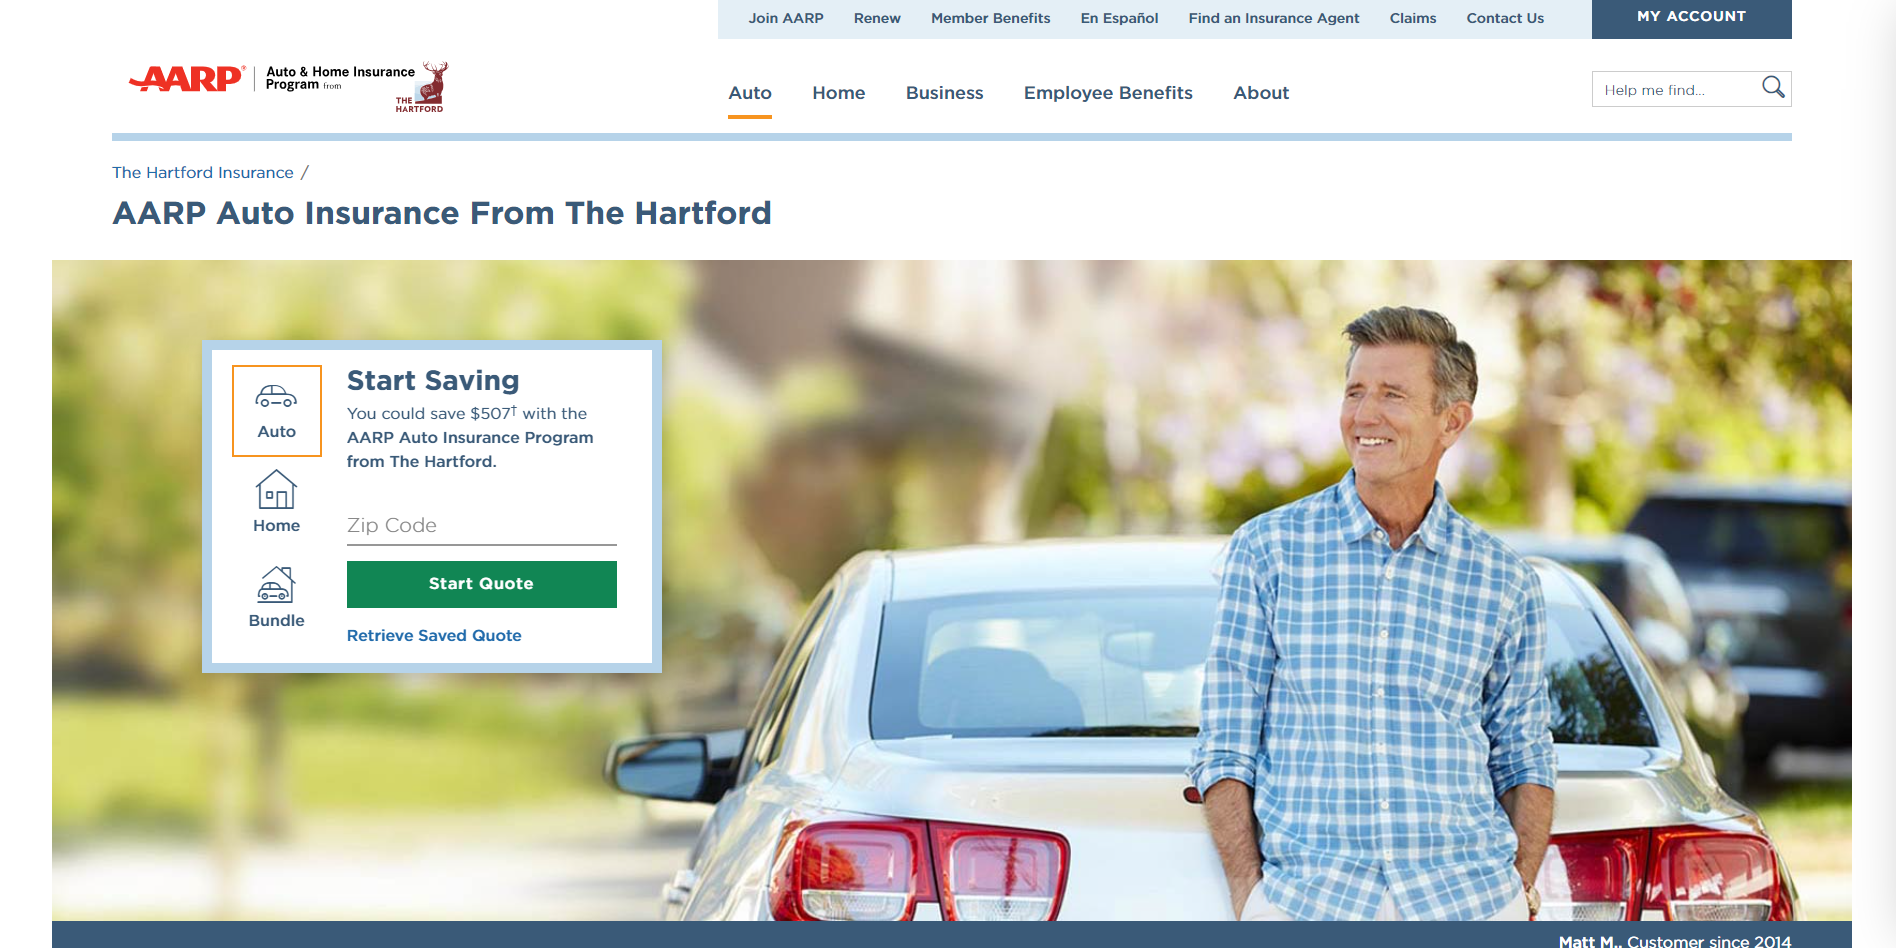 The Hartford home page